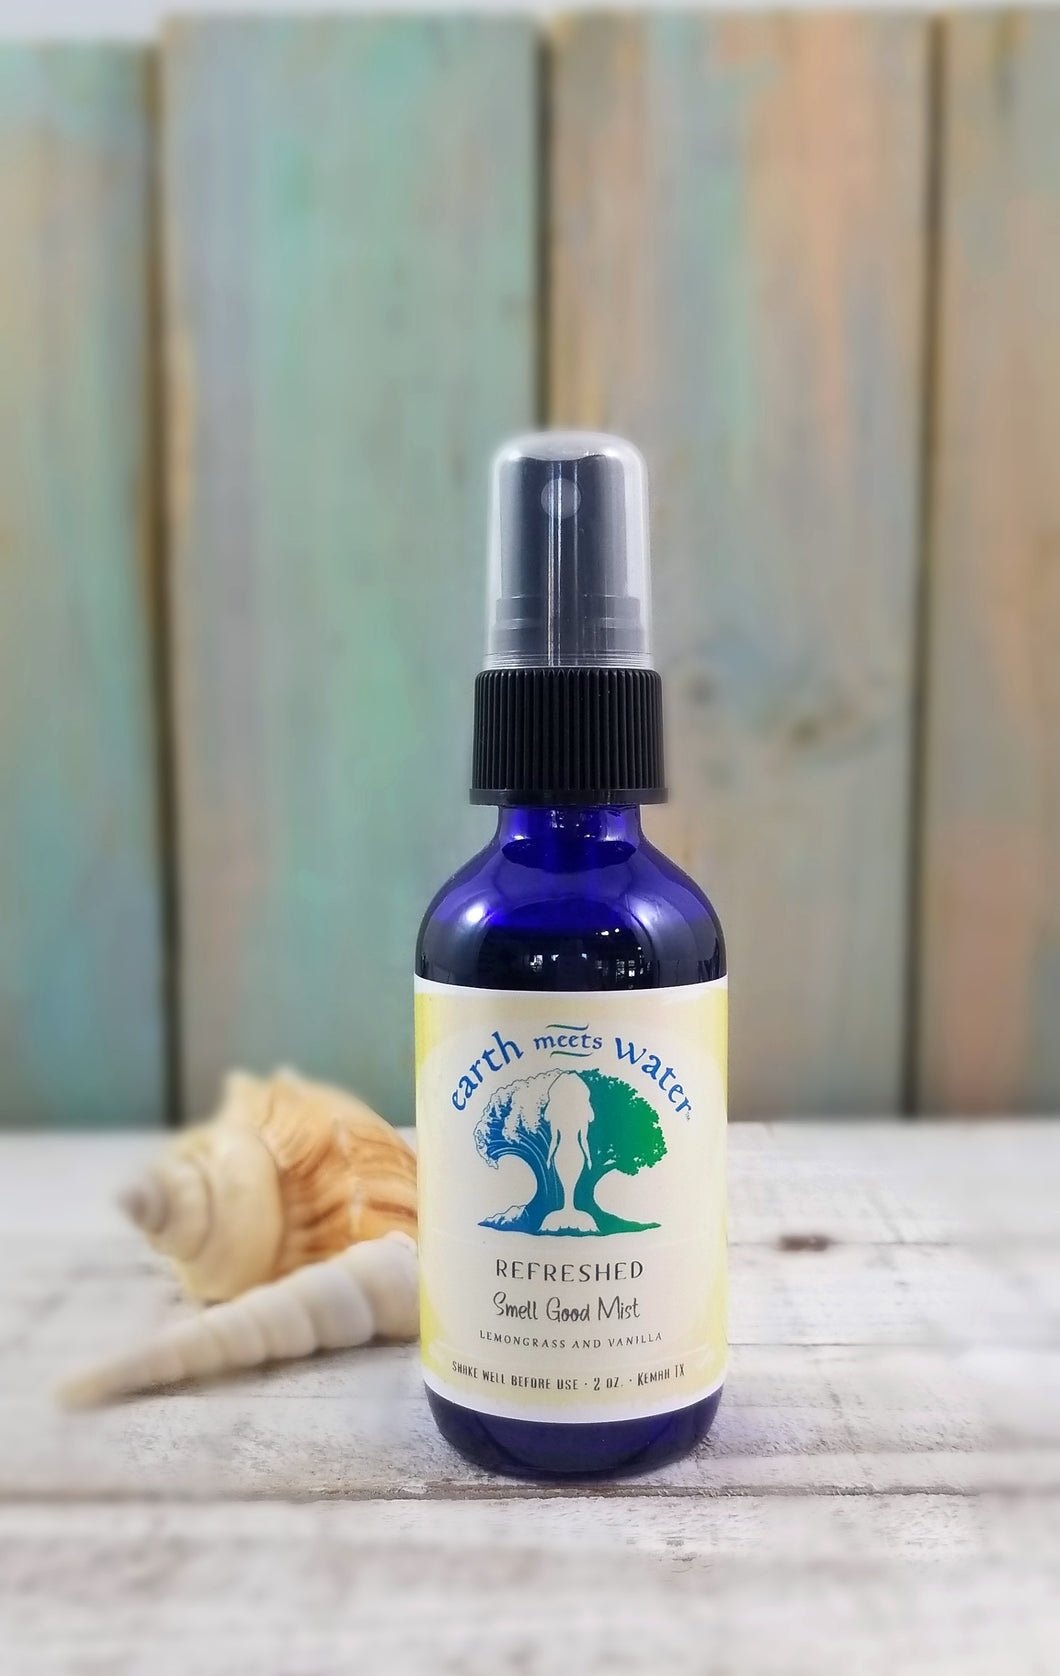 Refreshed- Smell Good Mist